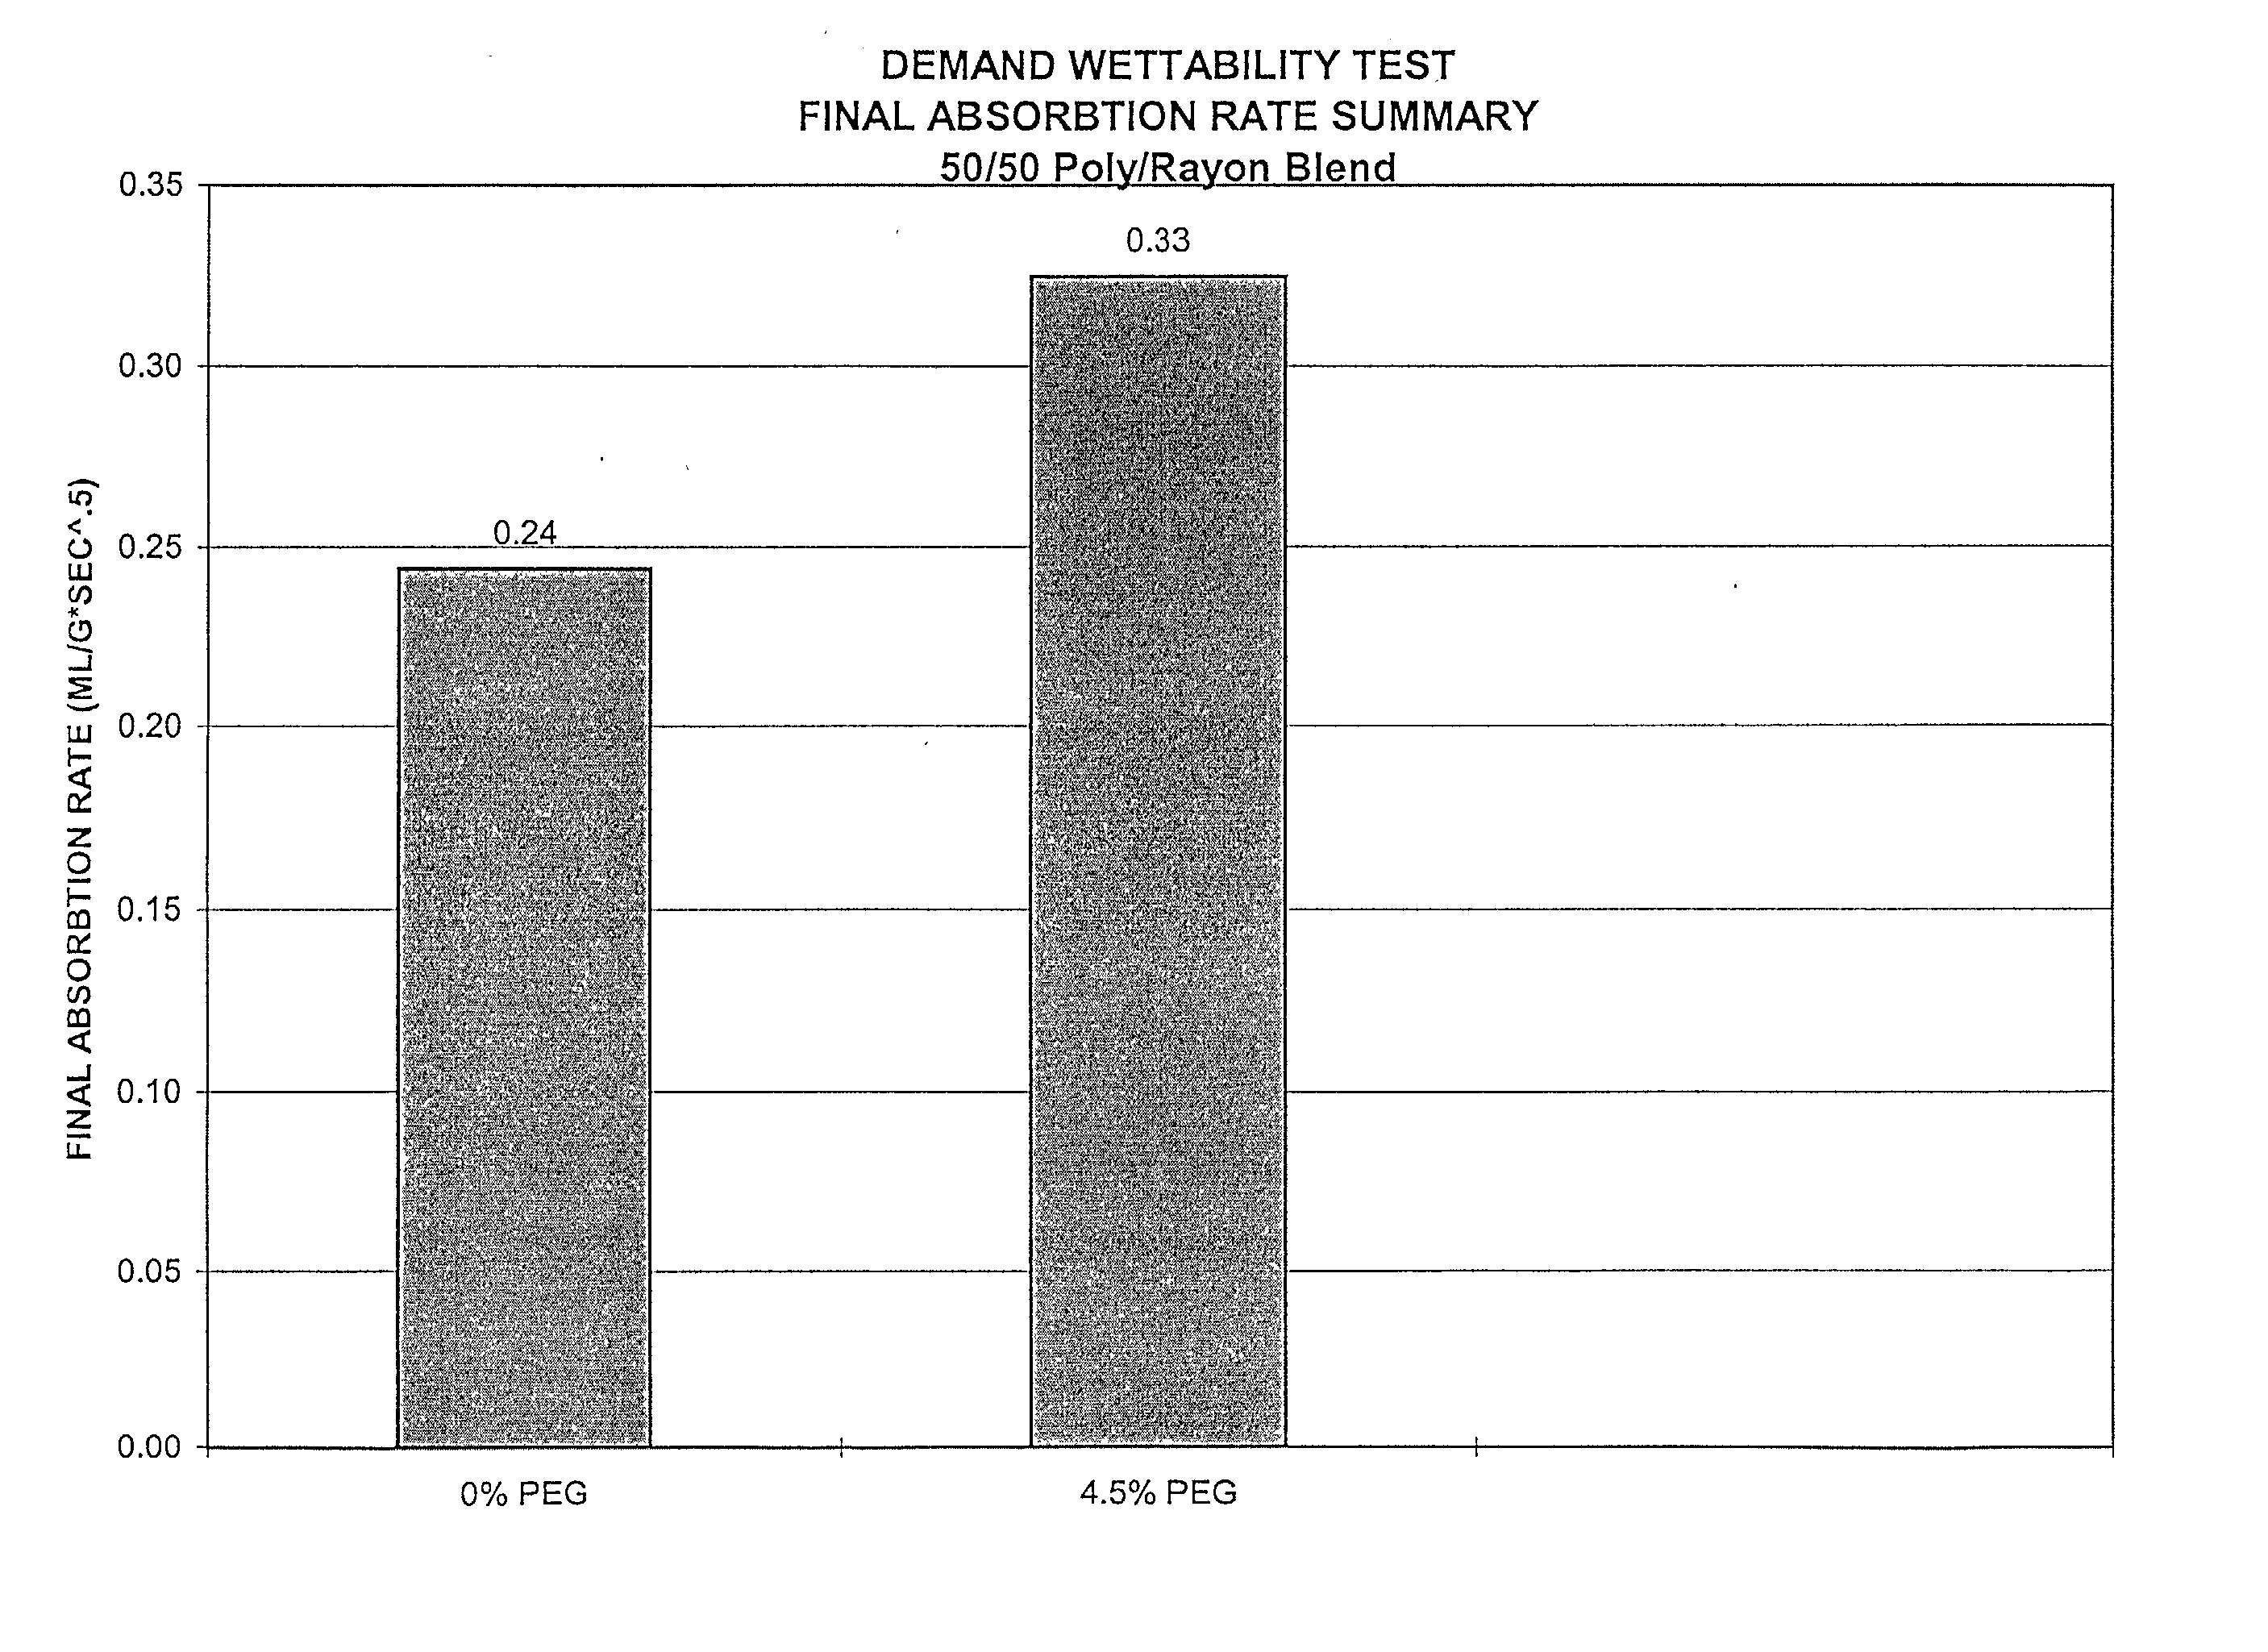 Polyethylene glycol modified polyester fibers and method for making the same